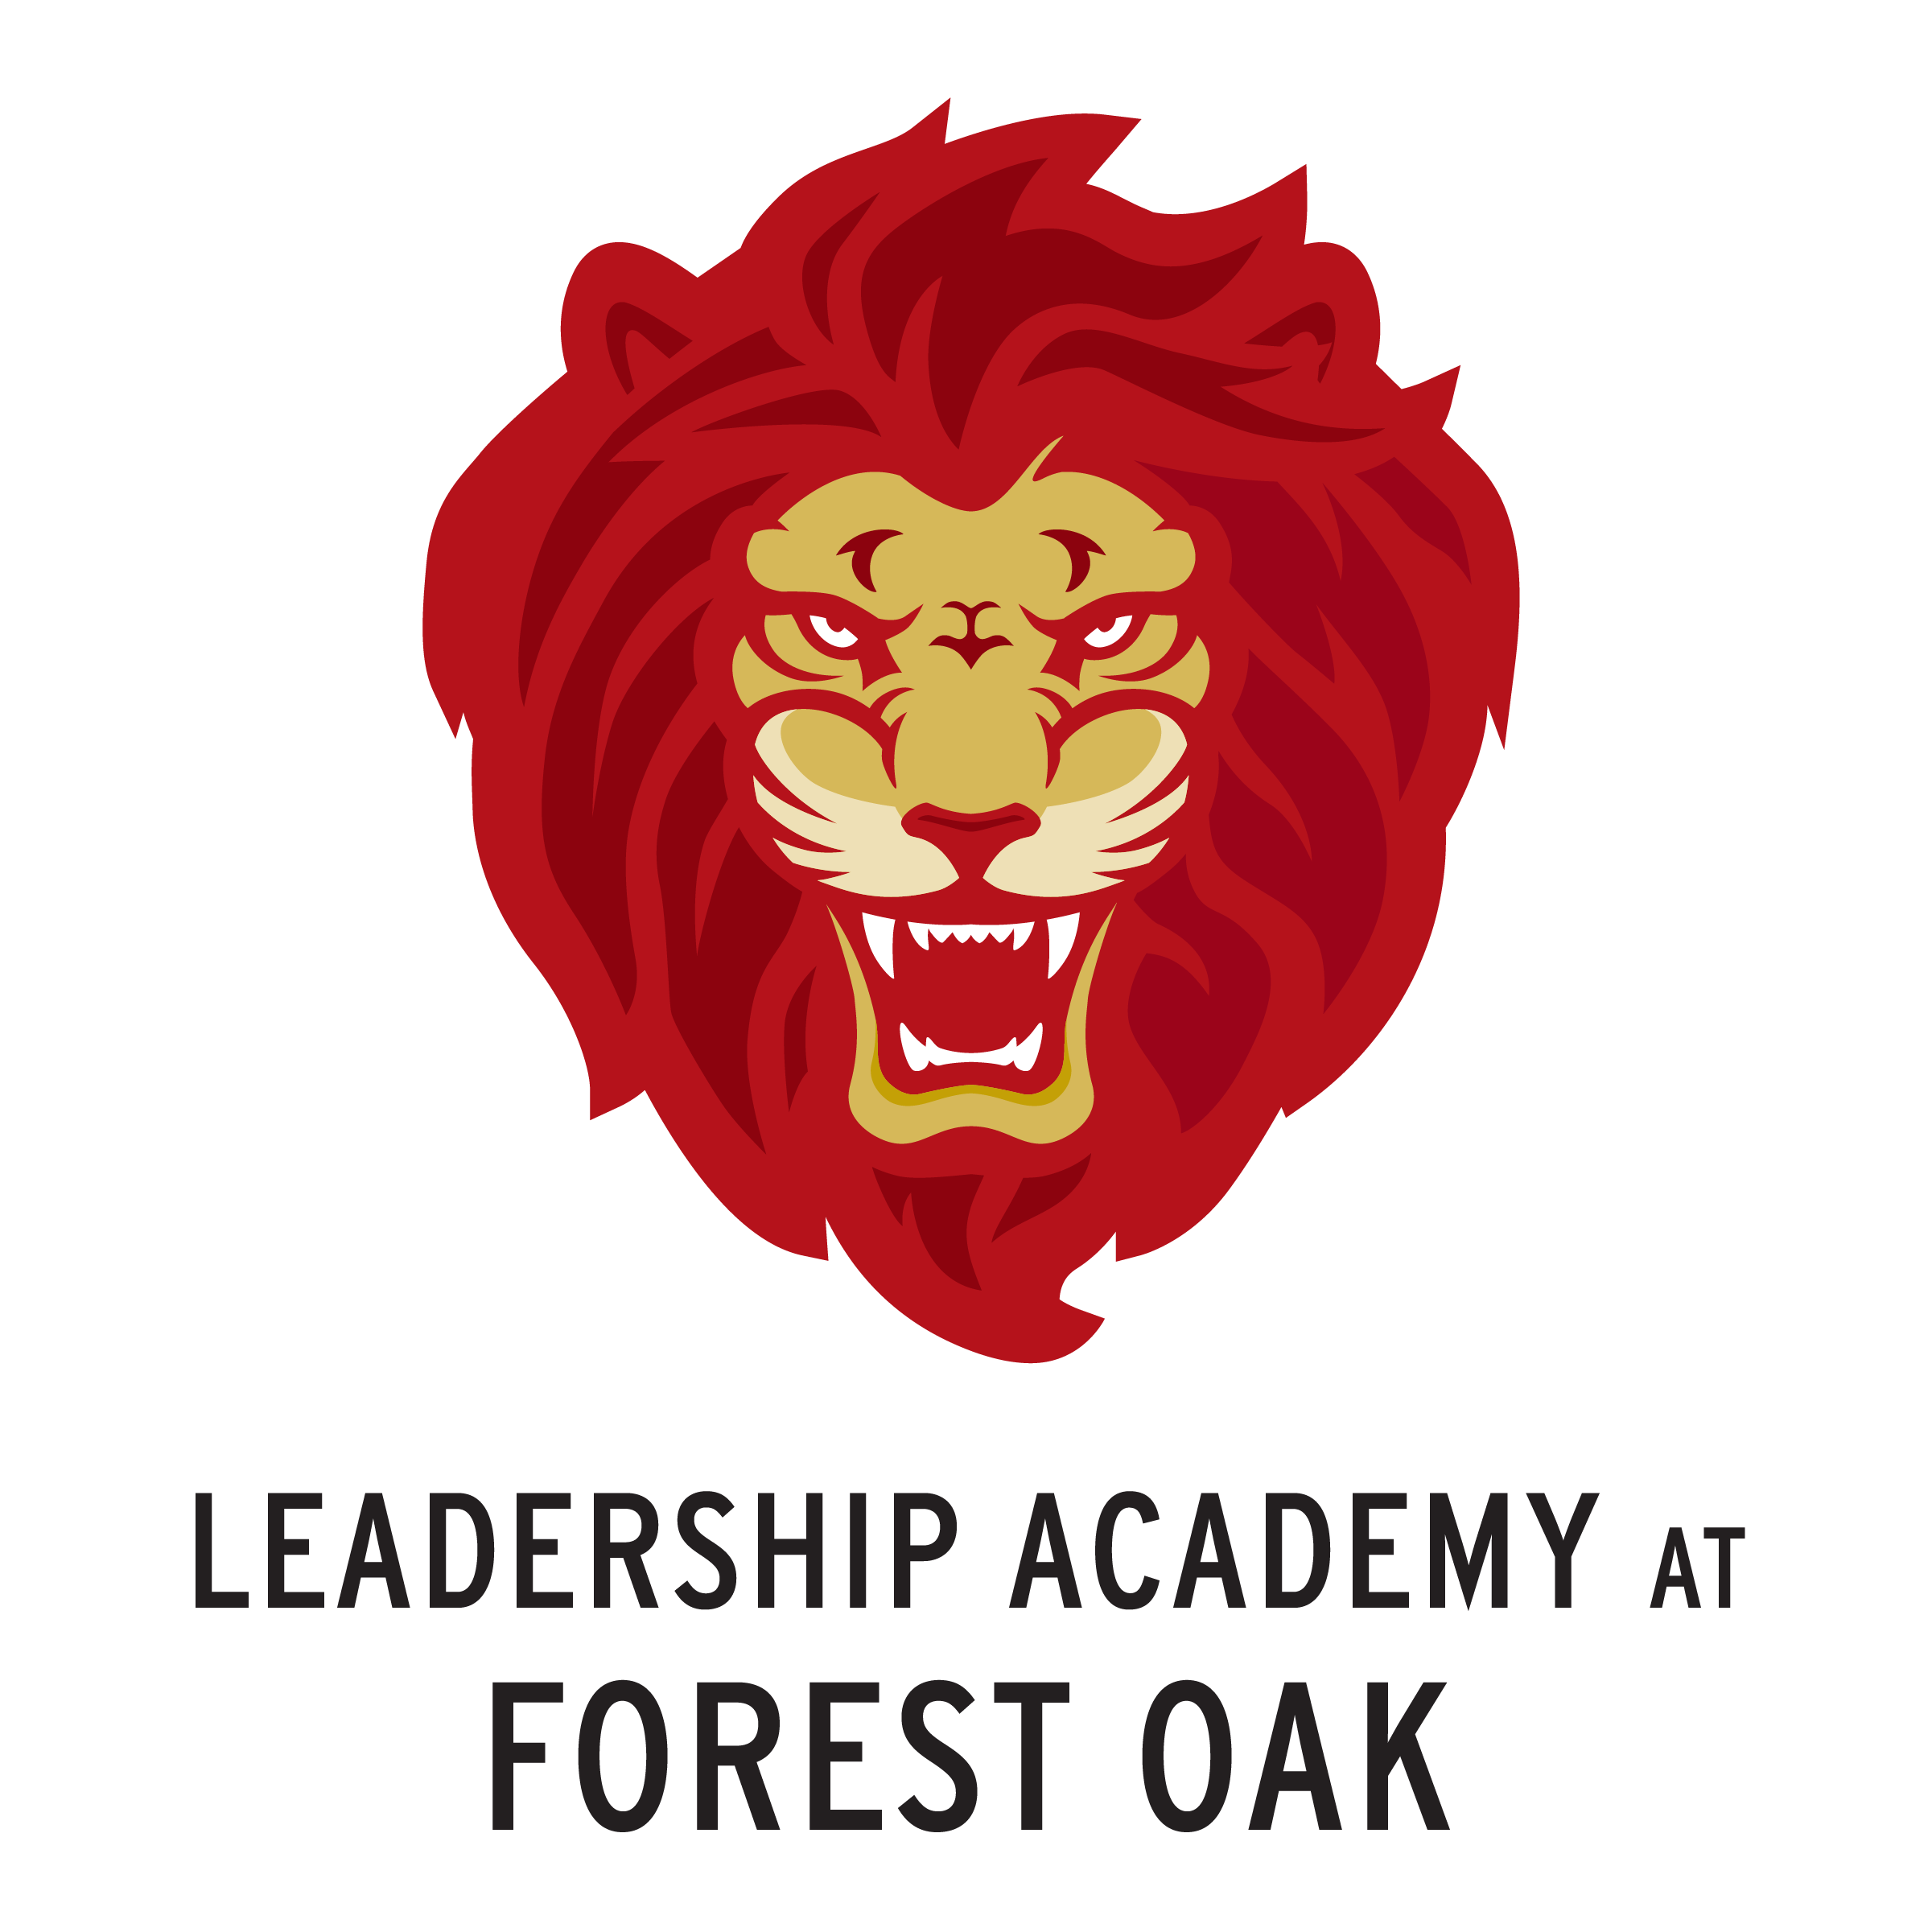 Animated Image of lion serving as logo of Forest Oak Elementary School